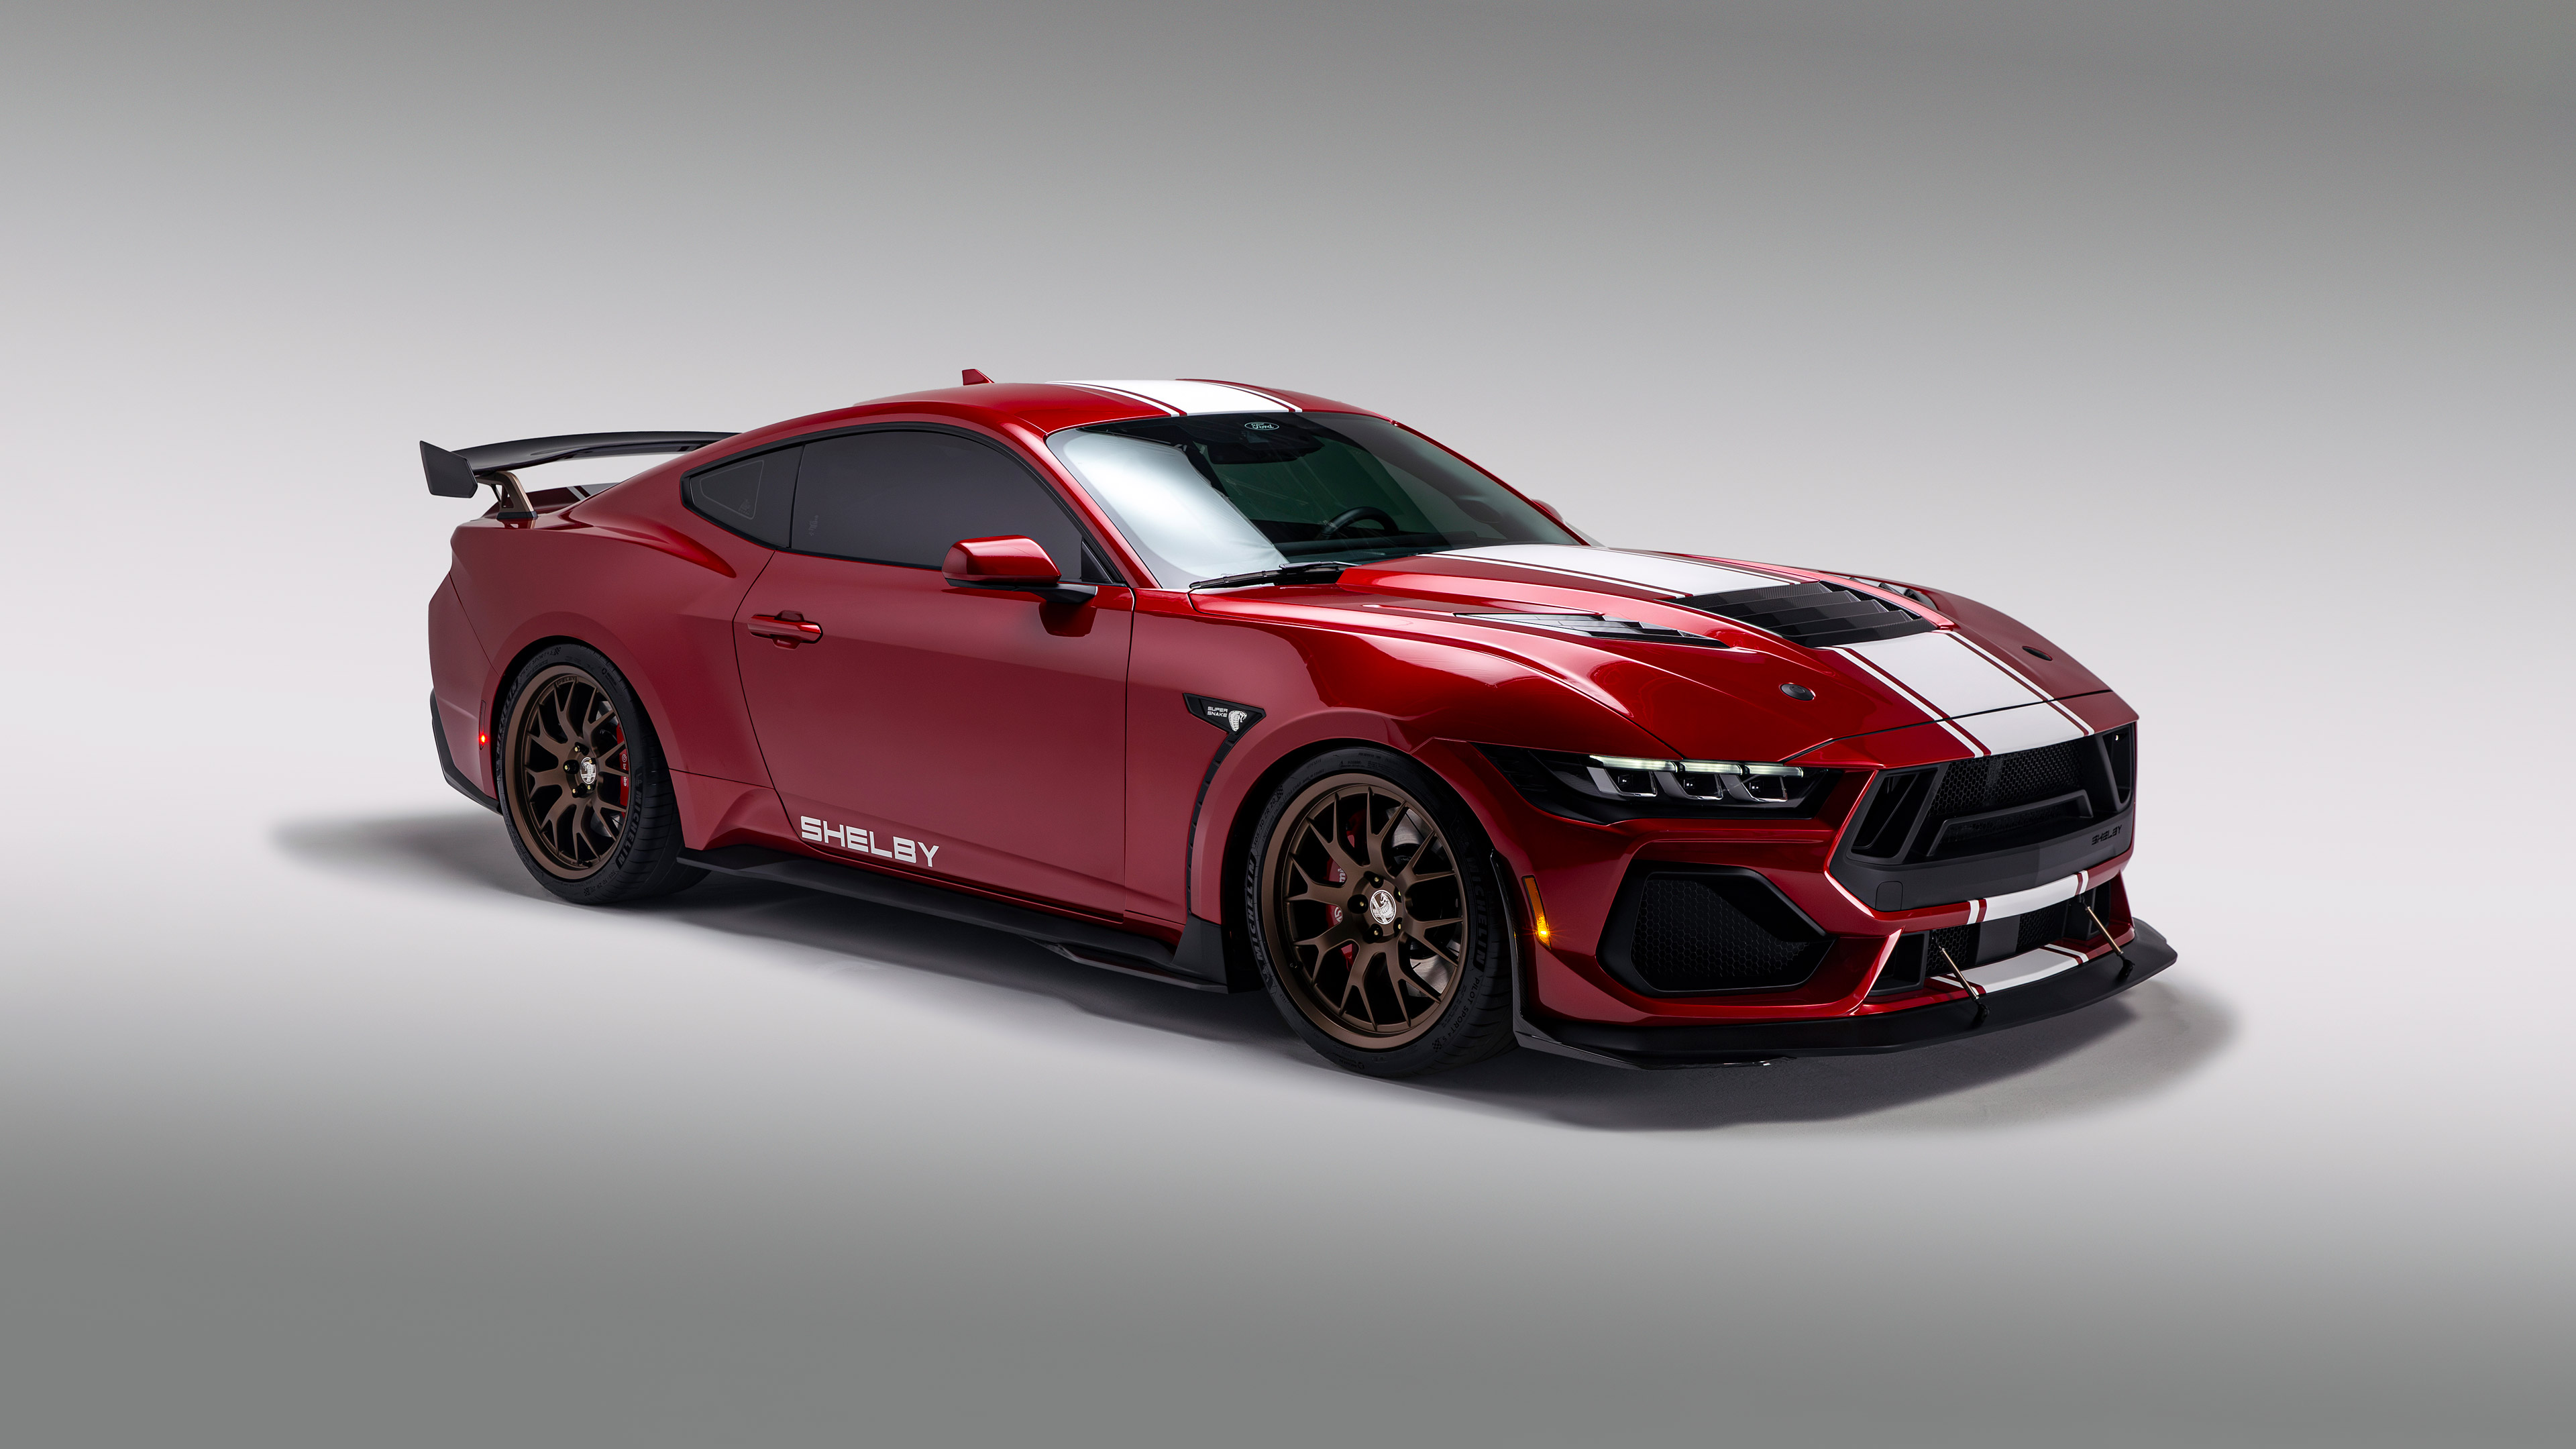 General 3840x2160 Ford Mustang Shelby Shelby Ford Mustang red cars muscle cars simple background Ford American cars V8 engine racing stripes